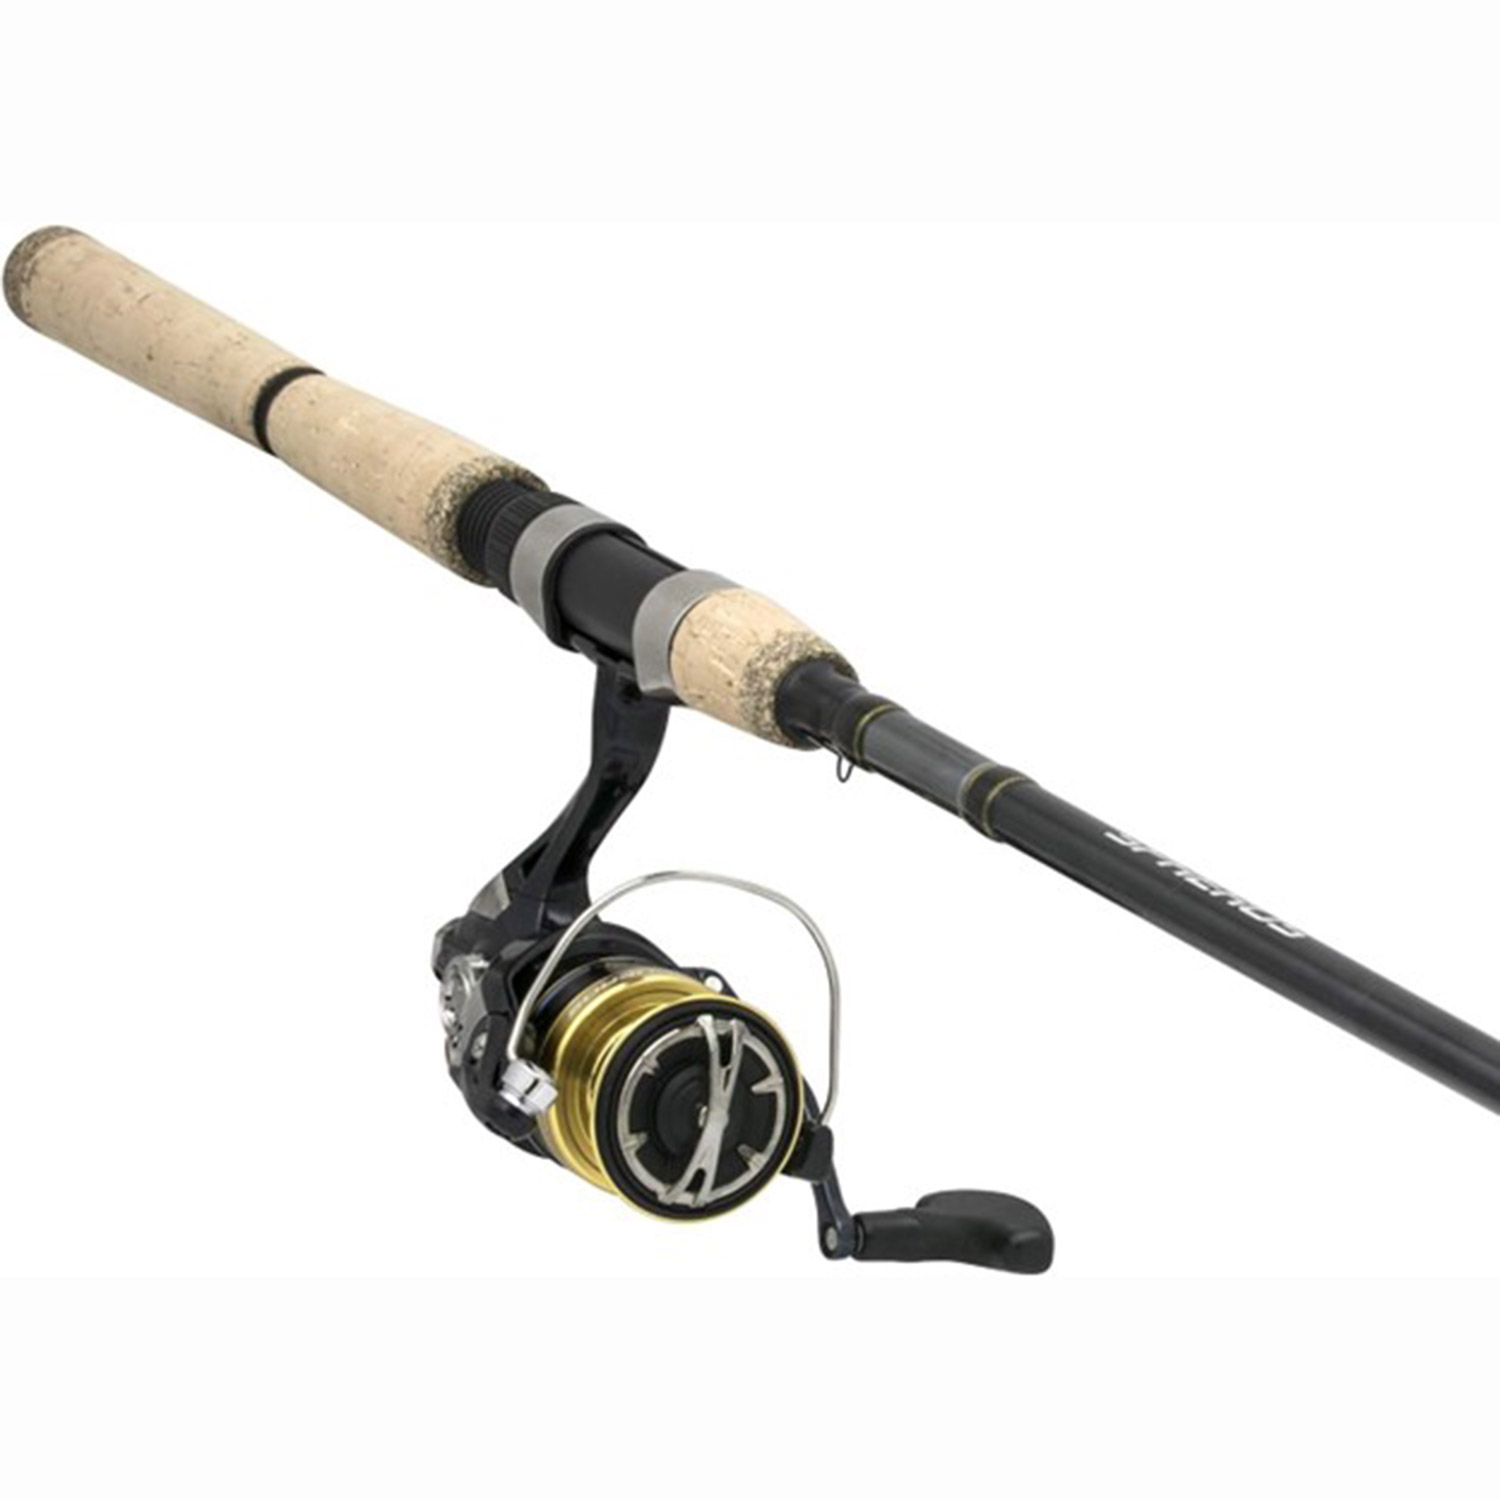 TOP 3 THINGS YOU NEED TO KNOW - SHIMANO SPHEROS SW COMBO  Shimano designed  the Spheros SW combo to provide anglers a saltwater combo with increased  versatility and performance. Here are